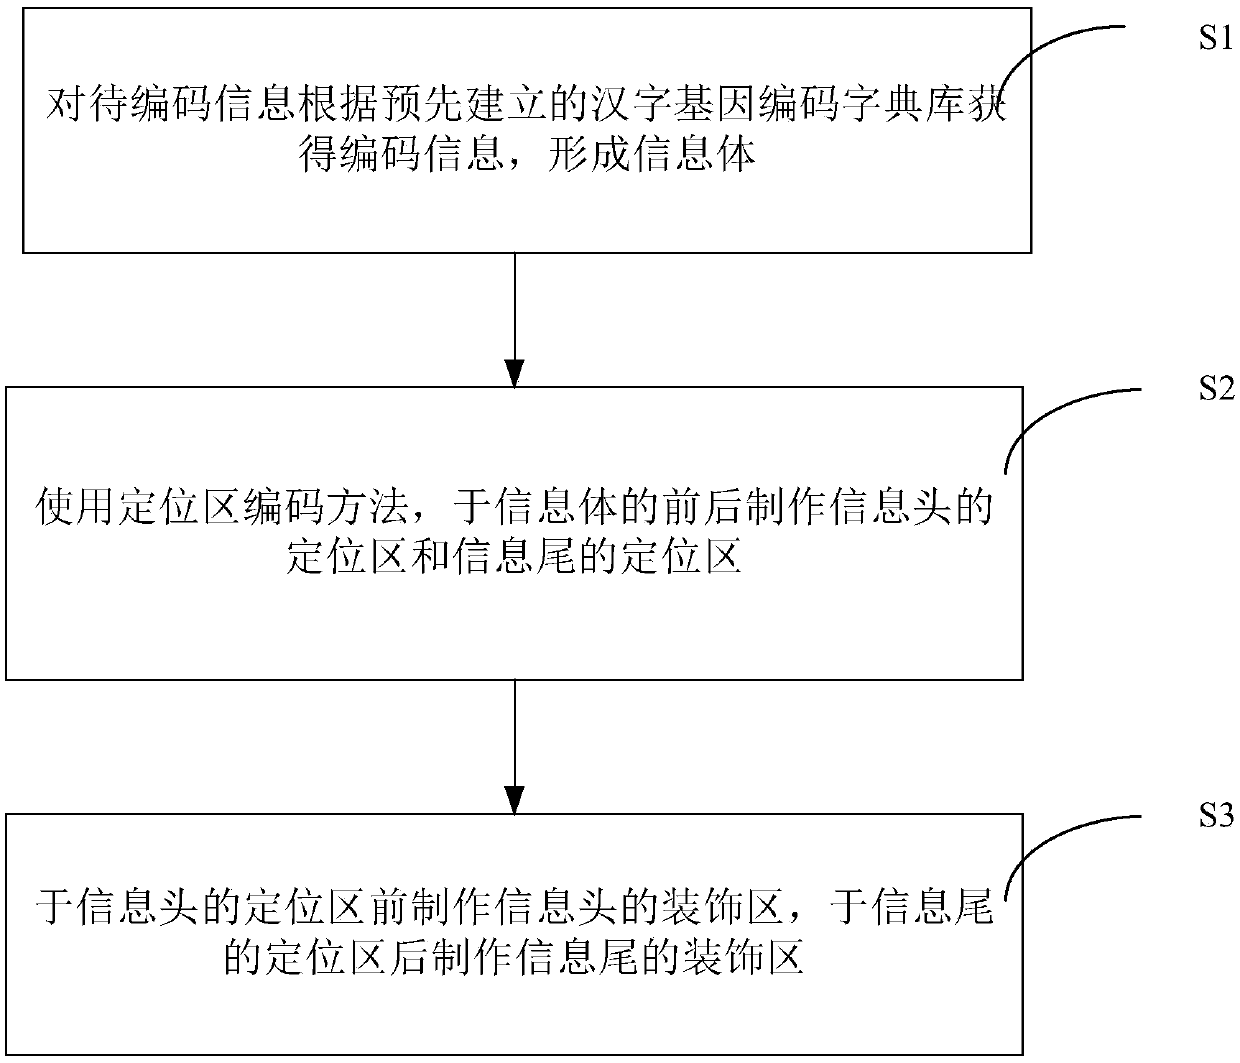 A method and system for gene encoding and decoding of Chinese characters